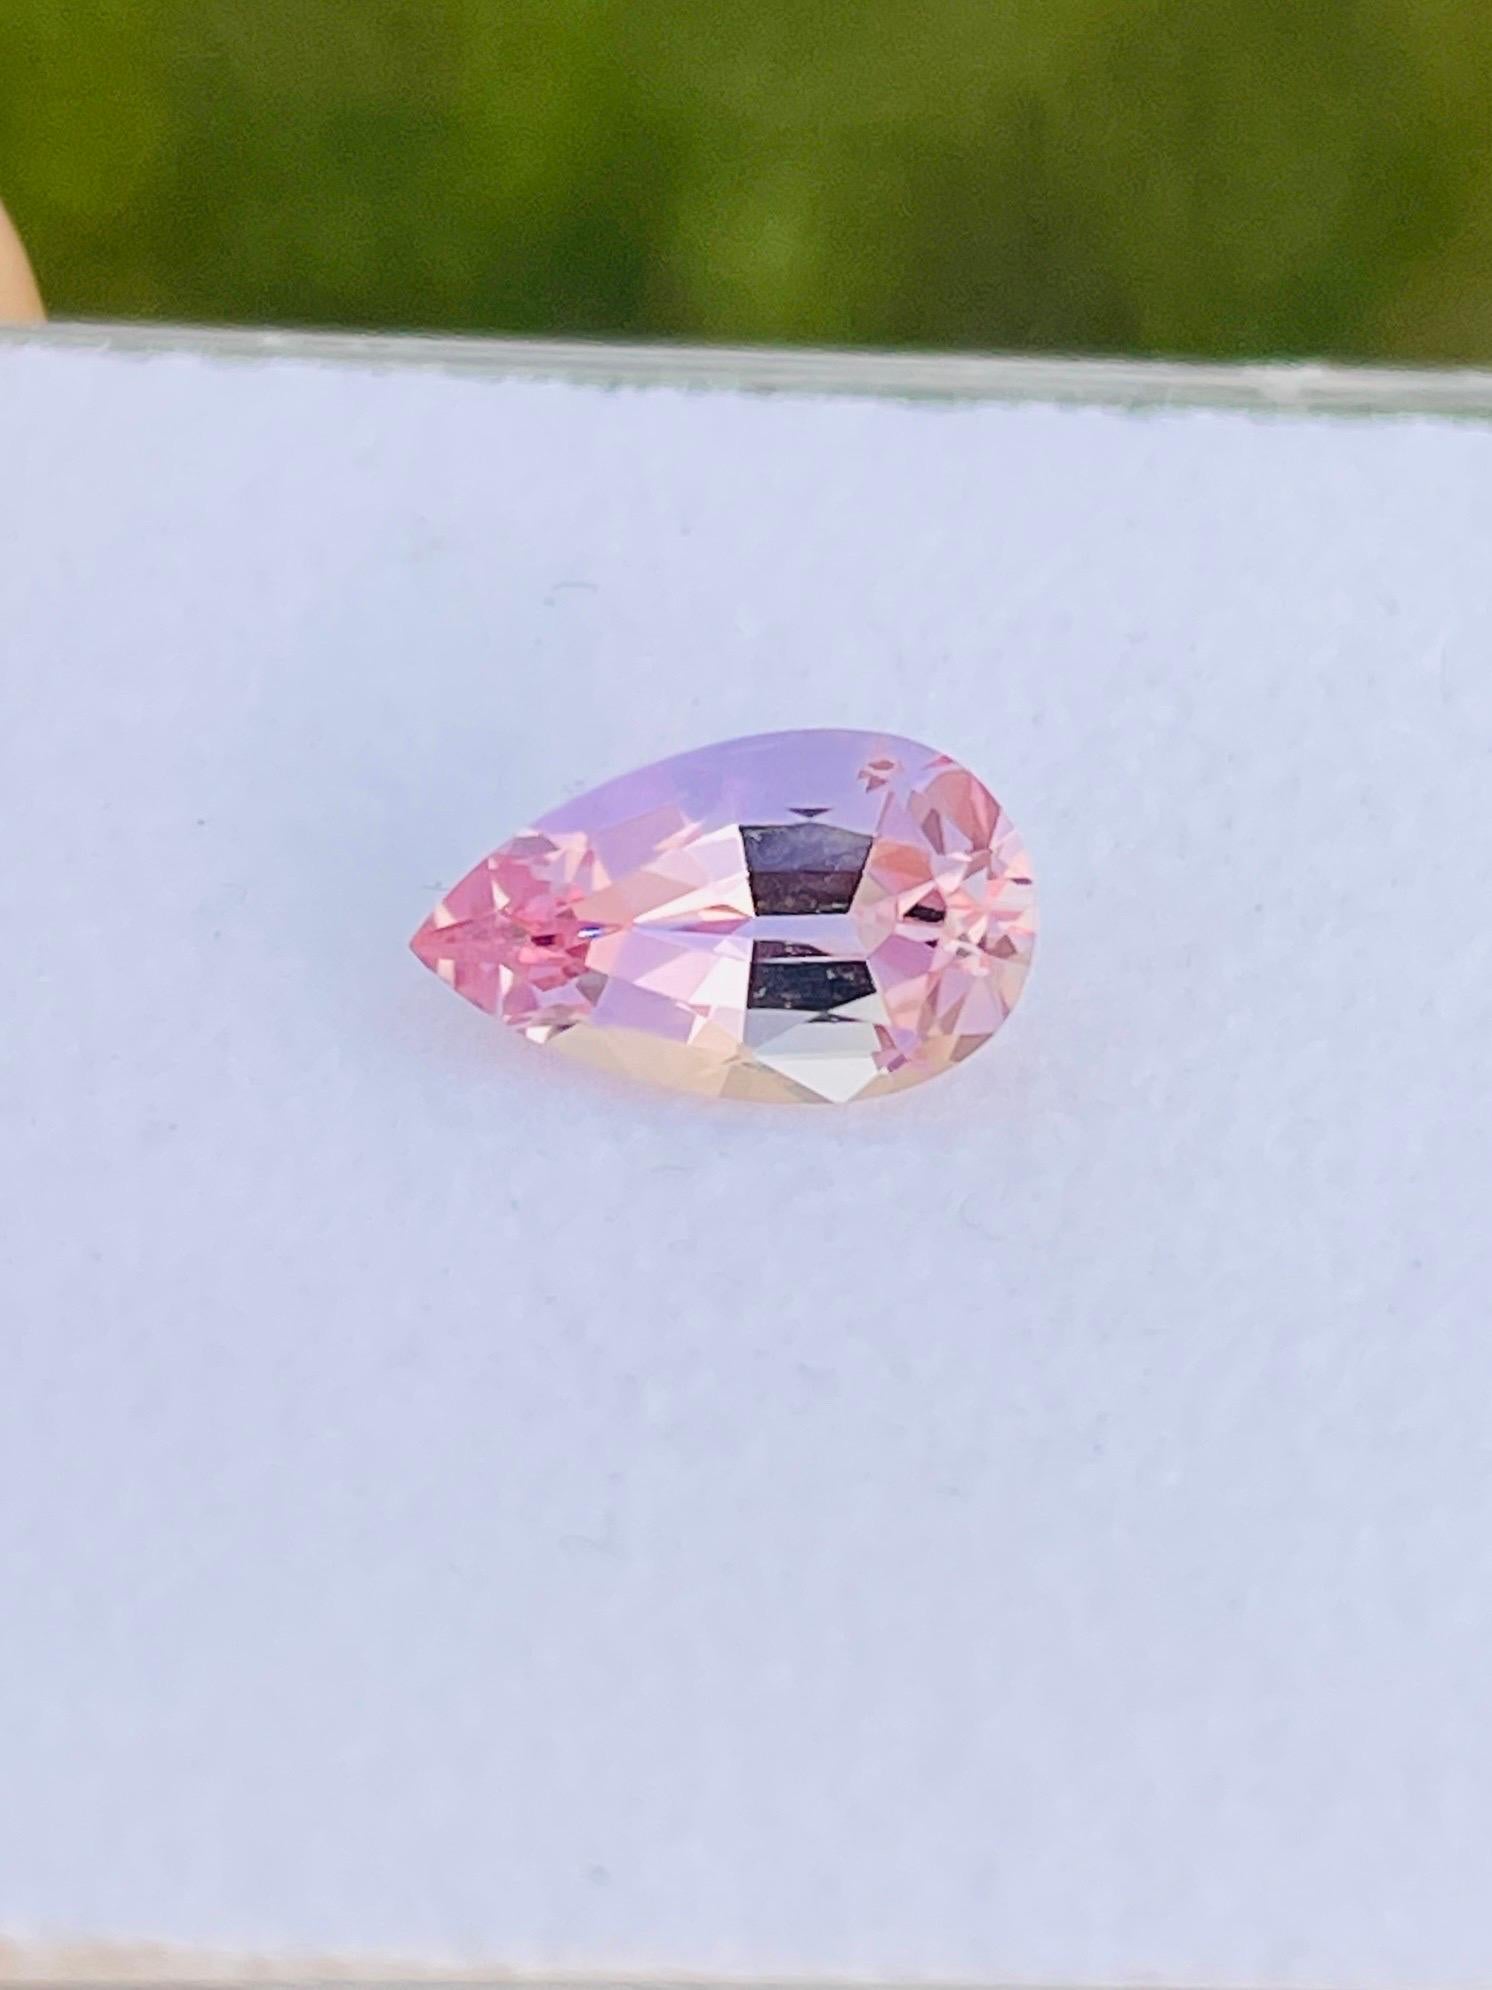 Name: pink imperial topaz 
weight:  1.37ct 
size: 9.2*5.6*4.2mm
origin: Brazil 
color: pink
clarity: loop clean 
Cutting:  perfect Europe cutting
Designer & cut by  : WB Gem 